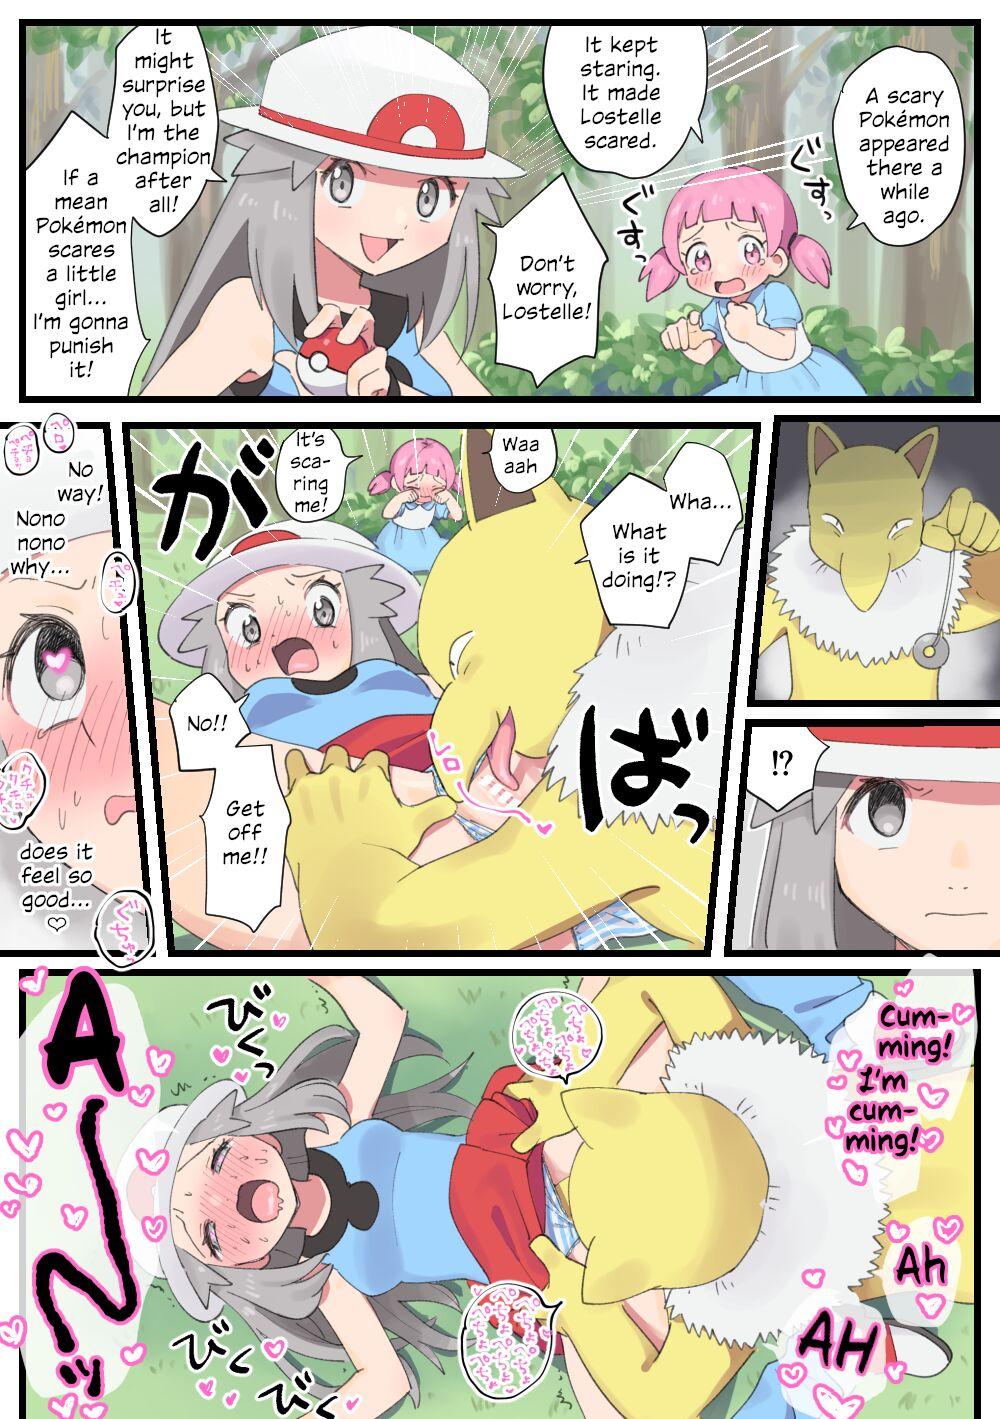 Hardcore Fucking Leaf goes to help Mayo-chan and gets hypnotically raped by Hypno - Pokemon | pocket monsters Japan - Picture 1